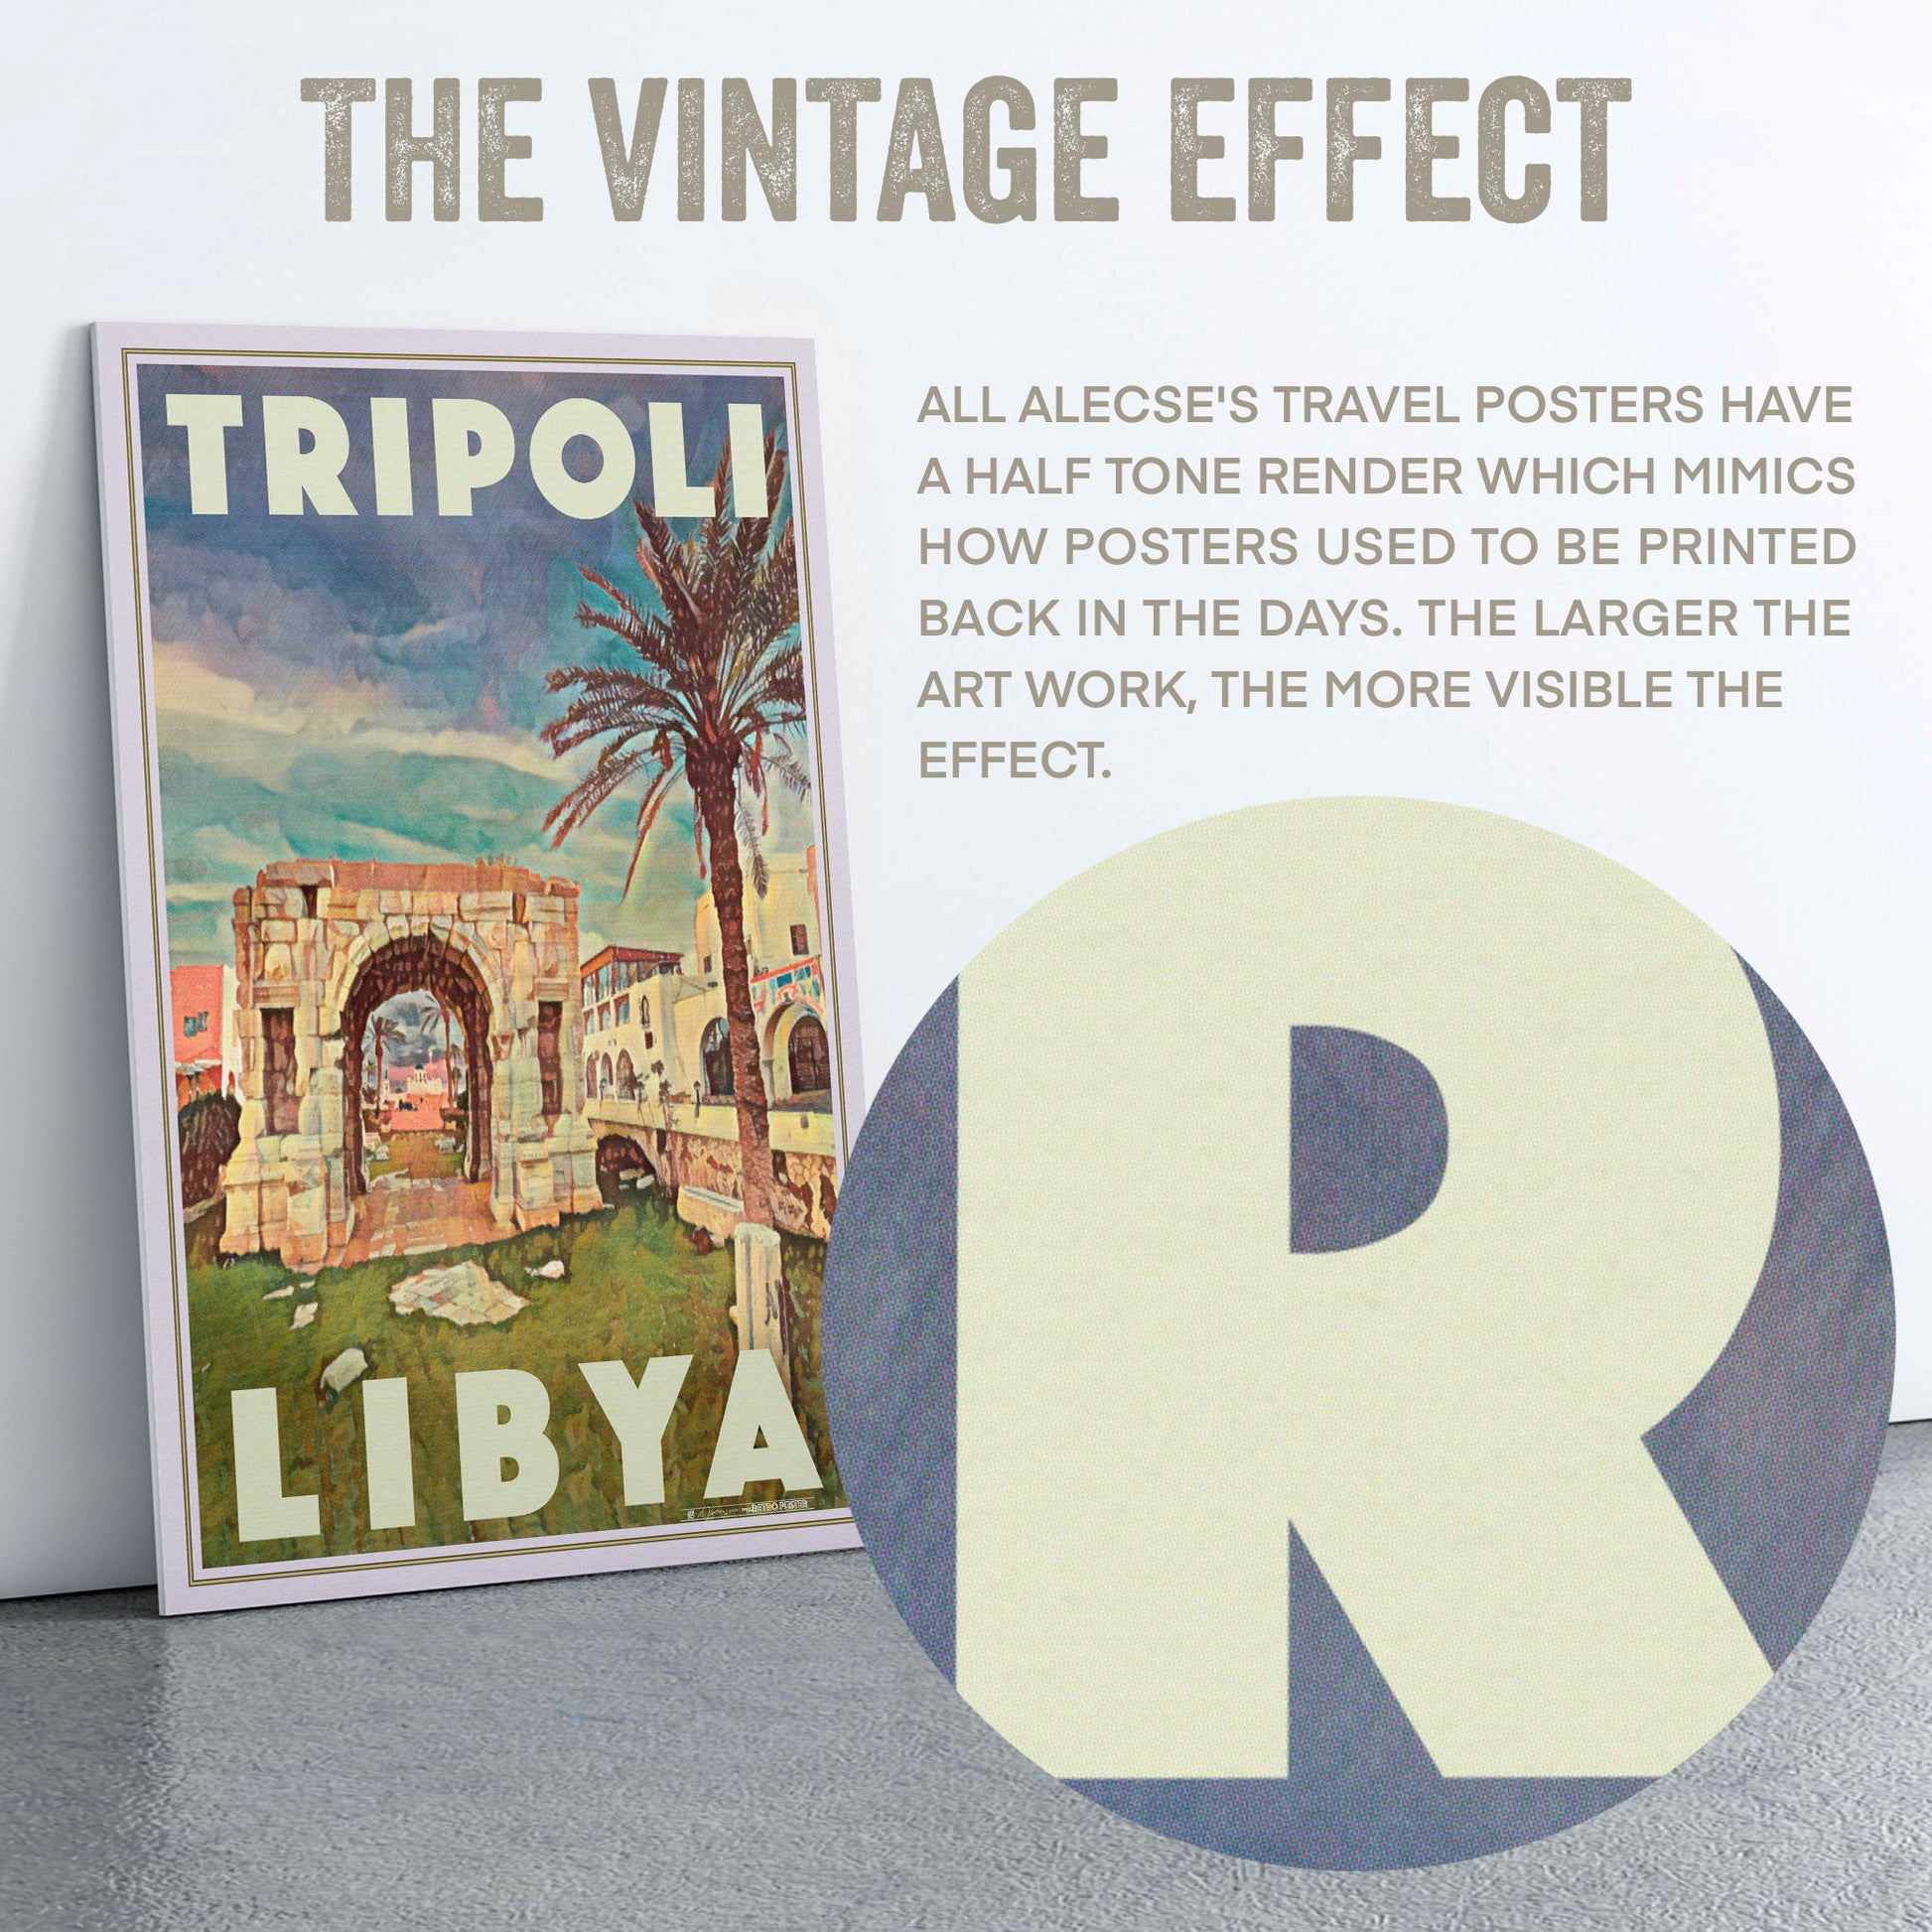 Macro shot of Alecse's Tripoli poster, highlighting the signature half-tone style of the artwork